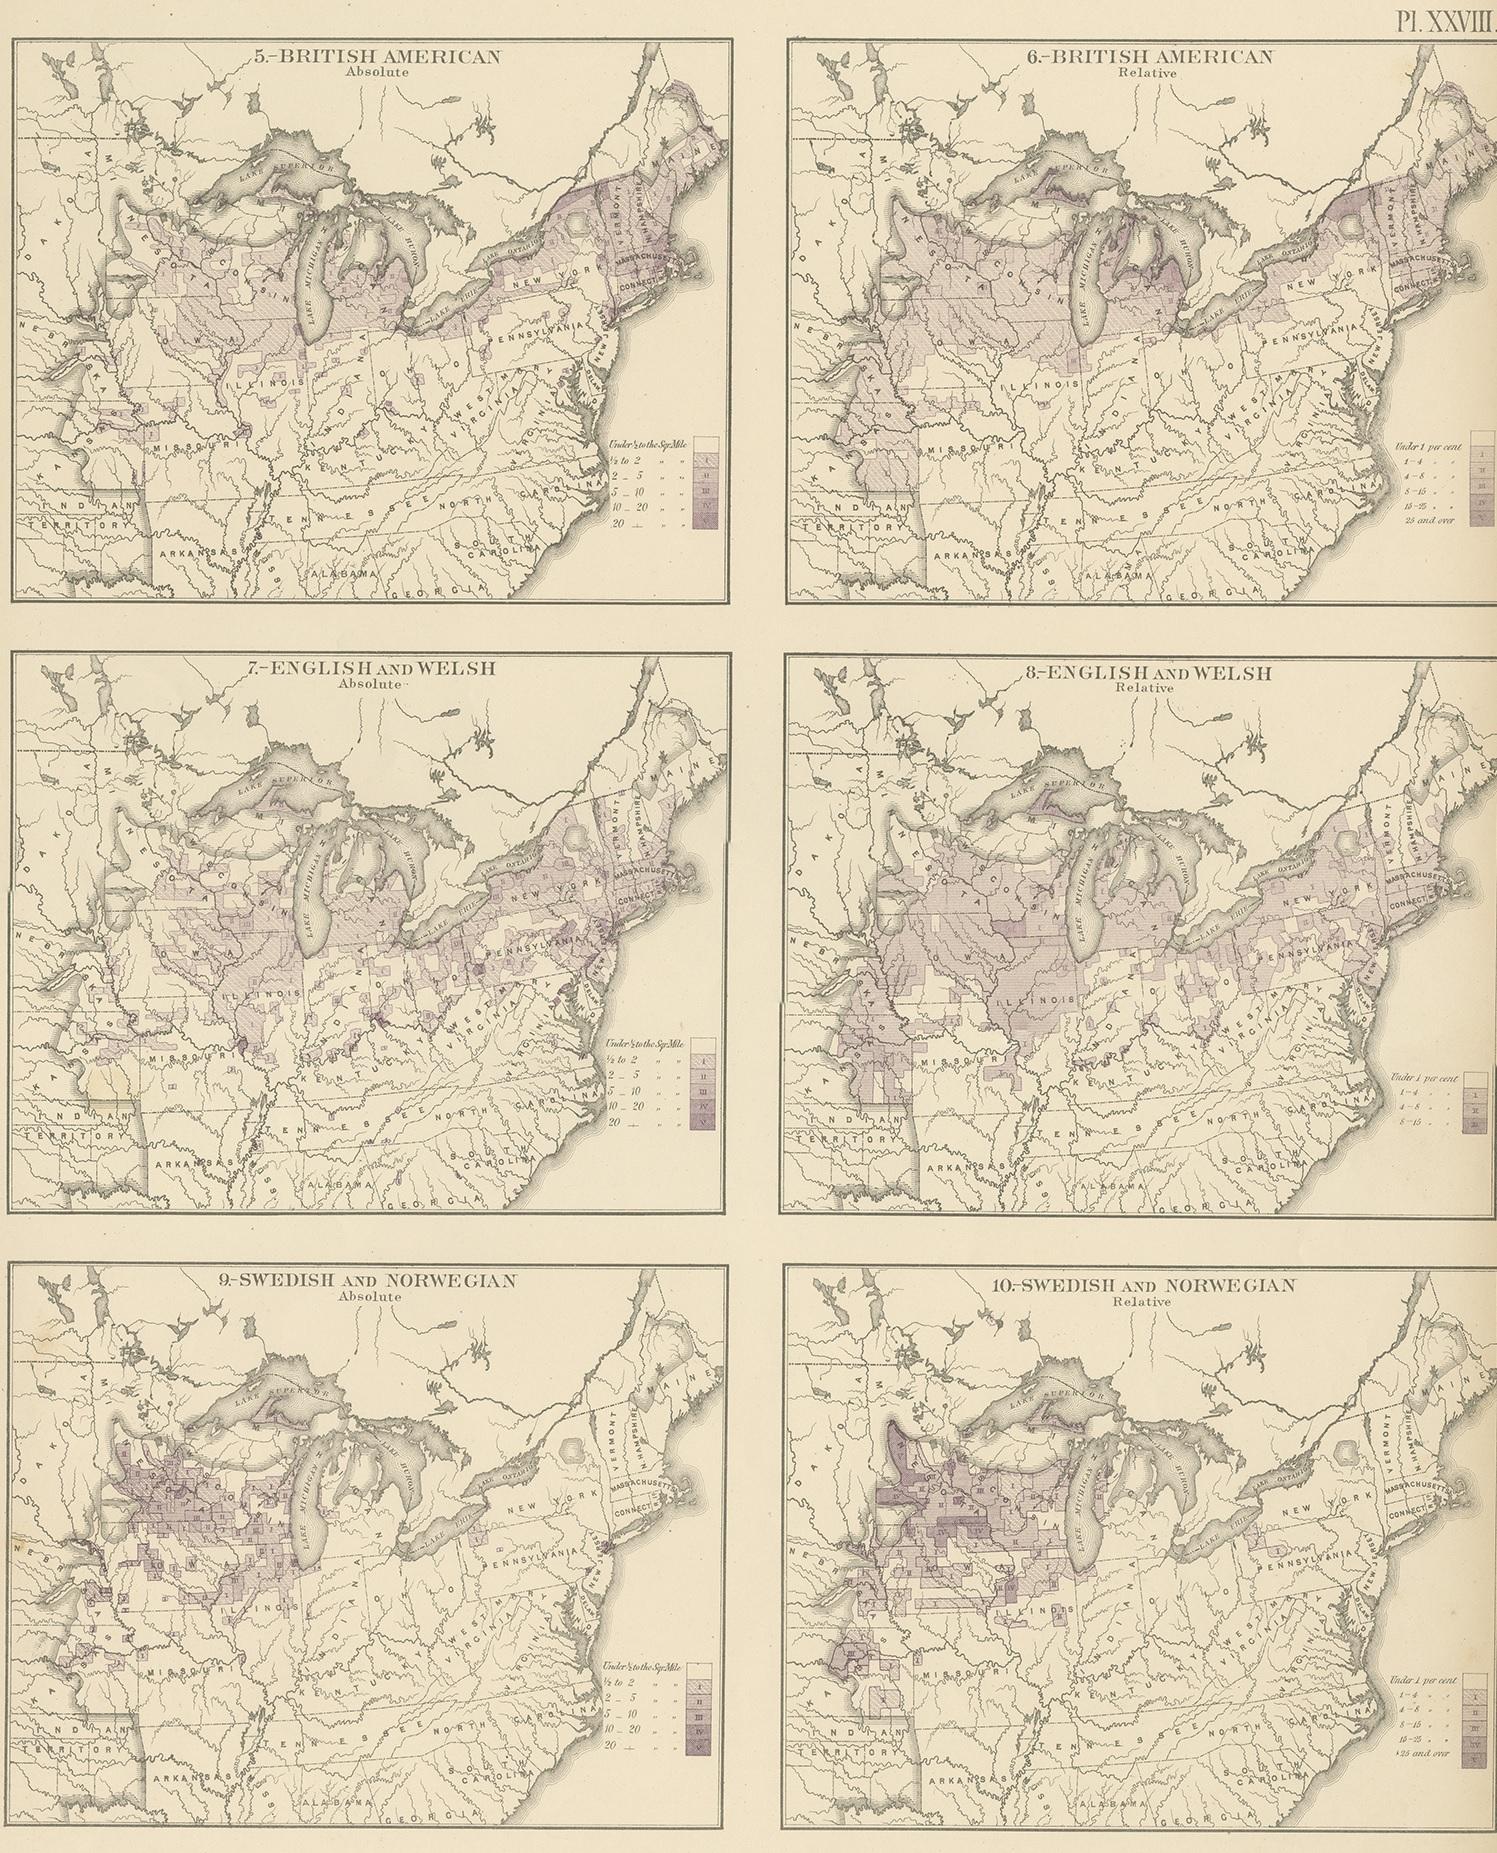 Antique chart titled 'Maps showing the distribution, within the territory of the United States, east of the 100th Meridian, of certain foreign elements of the population. I. according to their number to the square mile, absolute. II. according to